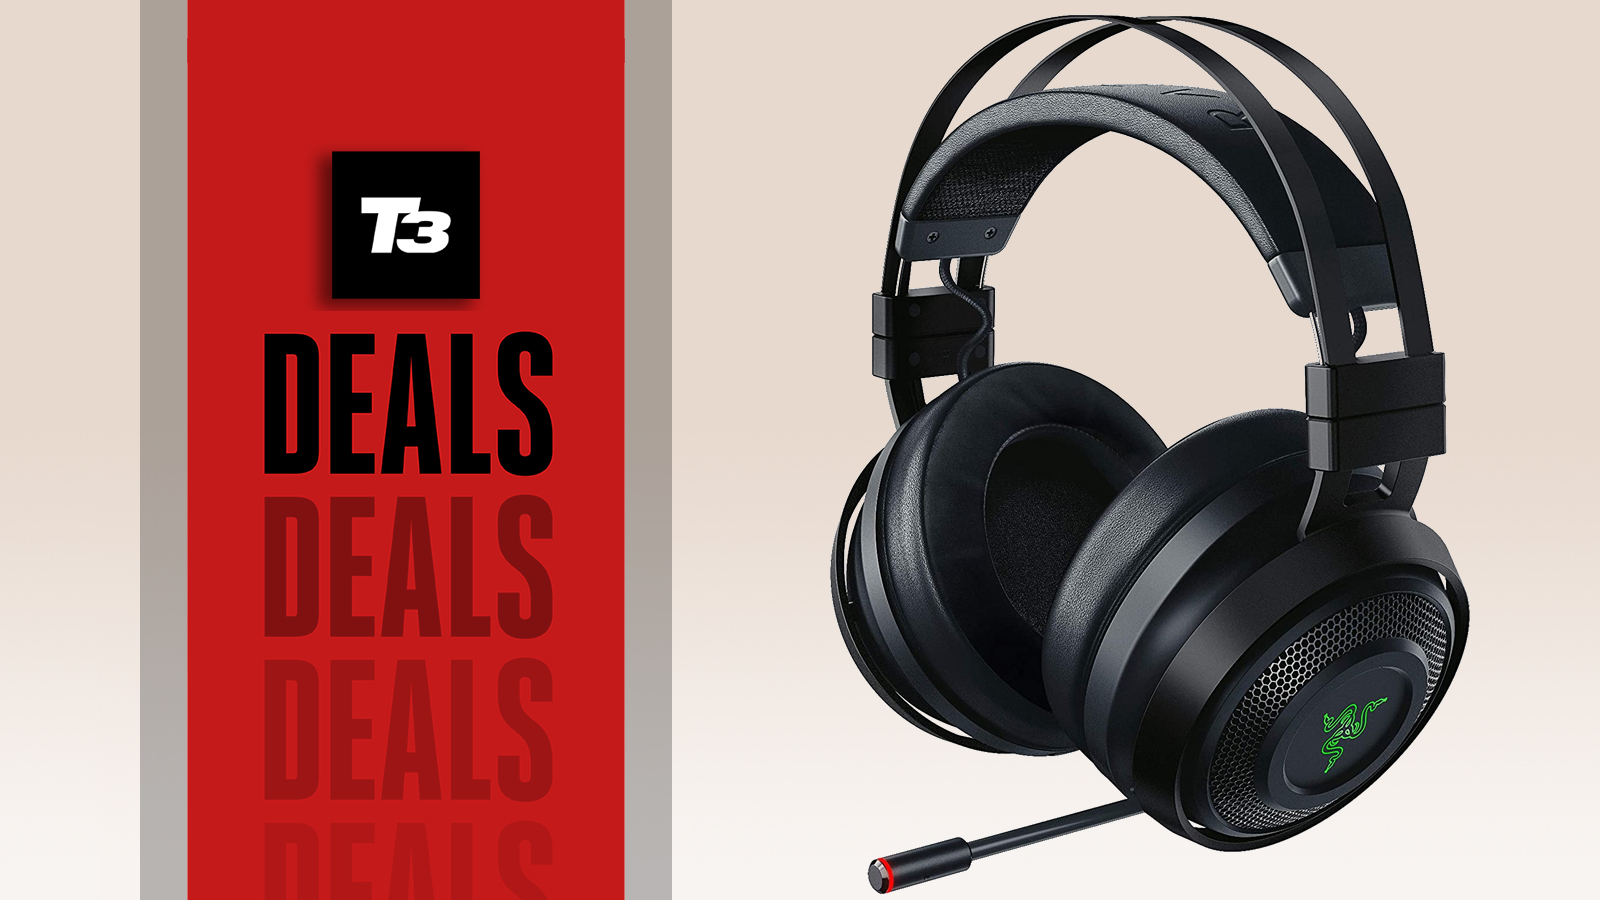 Cheap Gaming Headset Deals 30 Off Razer Nari Ultimate Headset At The Microsoft Store T3